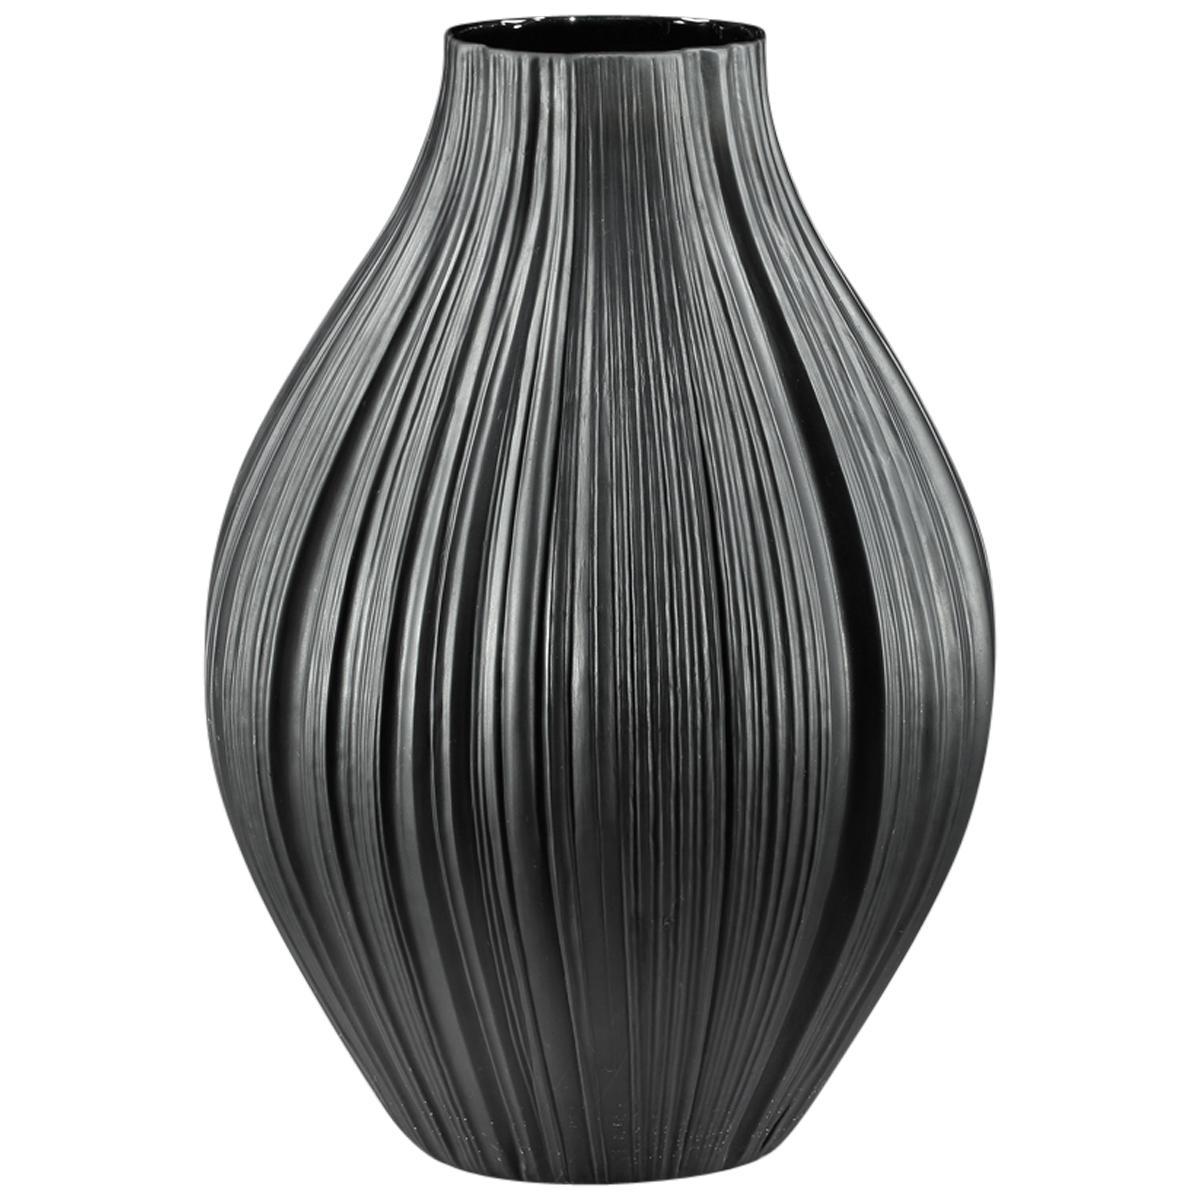 Martin Freyer for Rosenthal Studio: Massive, black, porcelain, pleated or plissee vase, 1968 

- The pleated vase is known as Martin Freyer’s best work working with the ancient theme of drapery in art Freyer worked as a portrait artist as well as a